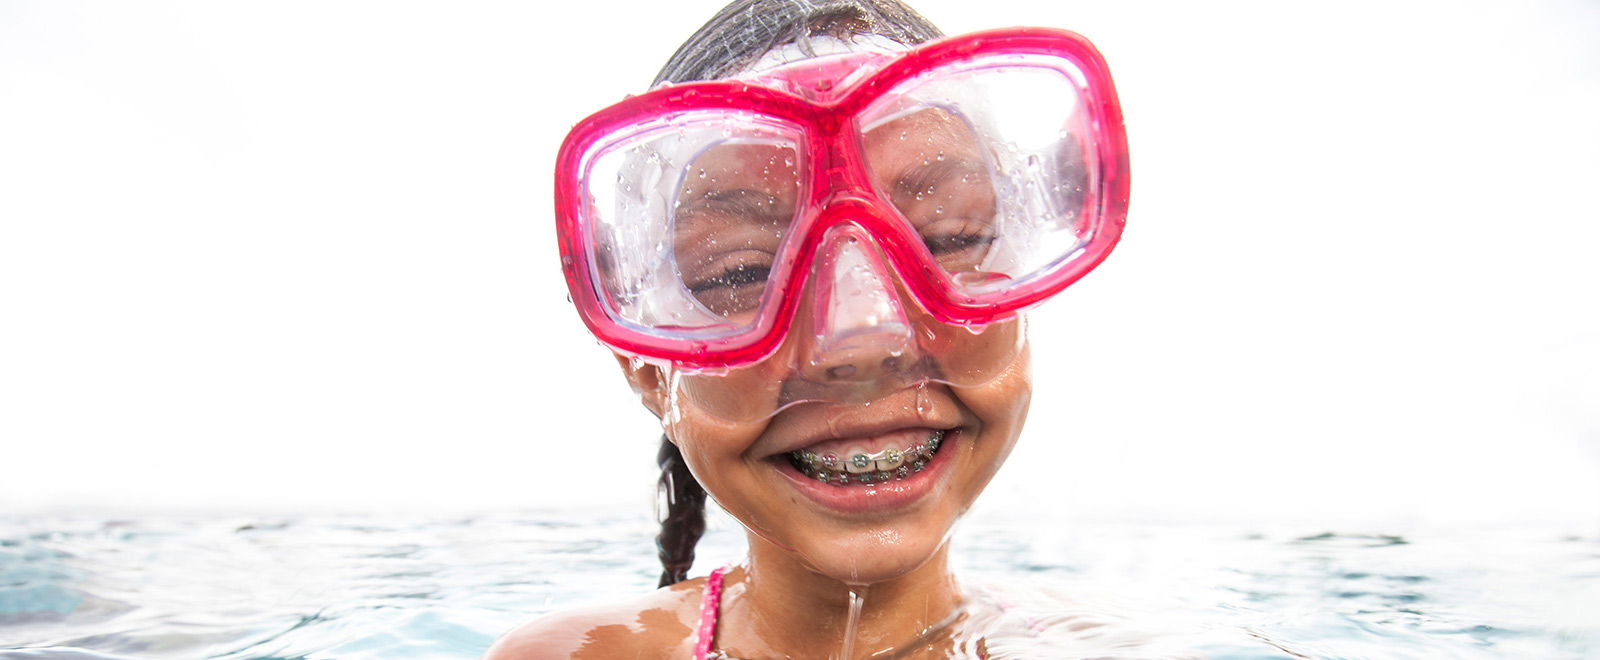 child with braces wearing goggles smiling for the camera